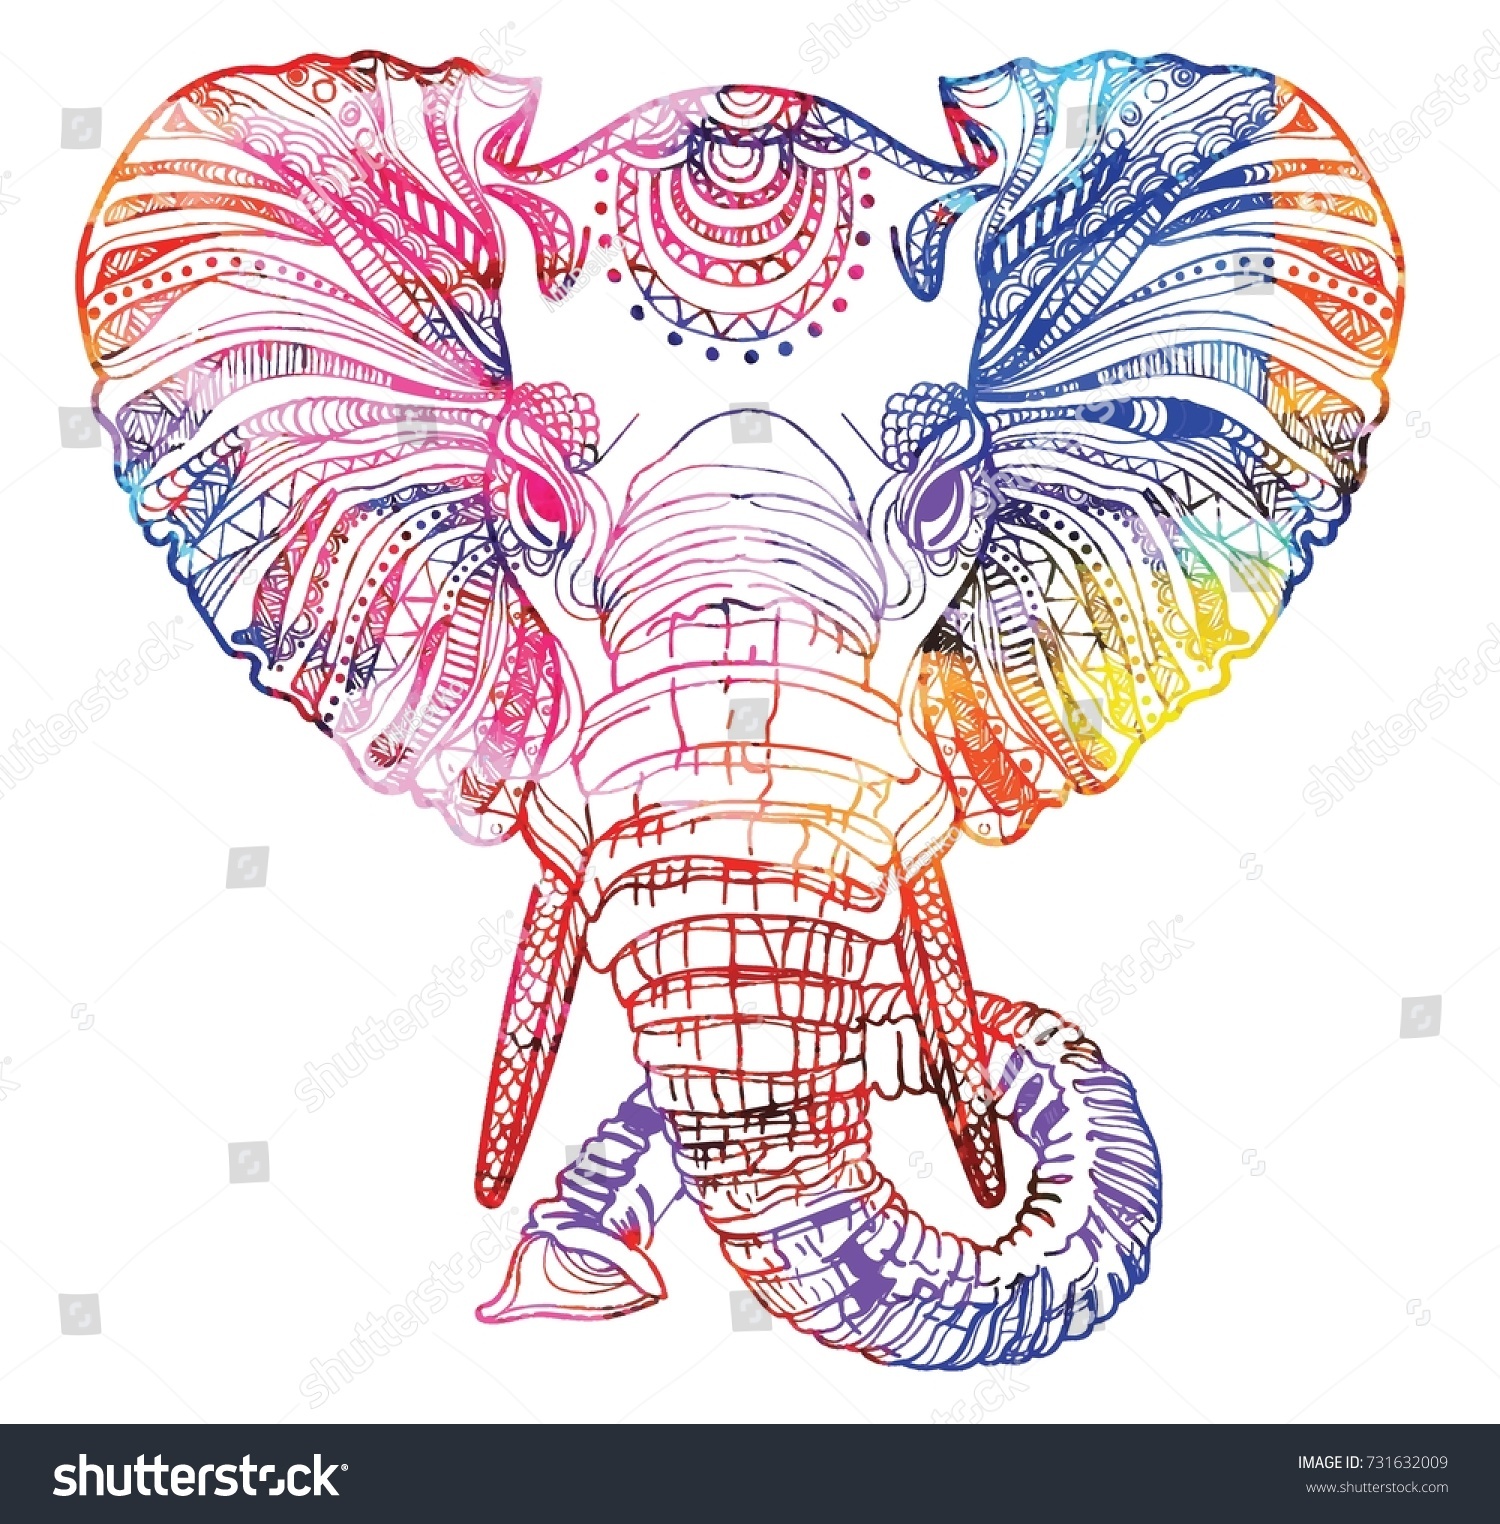 SVG of The head of an elephant. Meditation, coloring of the mandala. Large horns and long trunk. Elephants with tusks. Drawing manually, templates. Strips, points, arrows. Spots of watercolor paint, spray.  svg